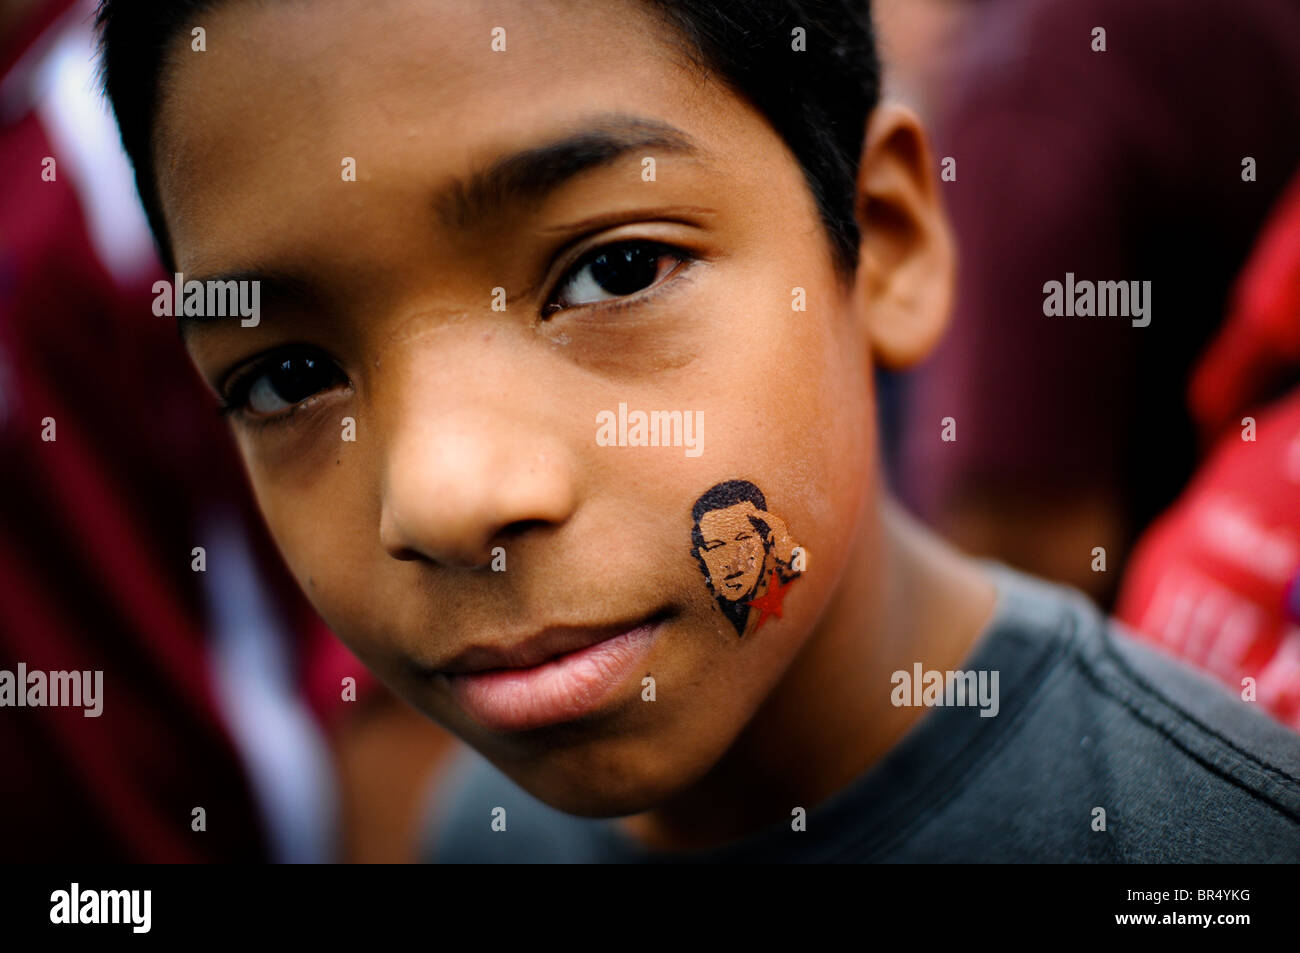 Young Venezuelan boy with President Chavez temporary tattoo in Caracas. Stock Photo